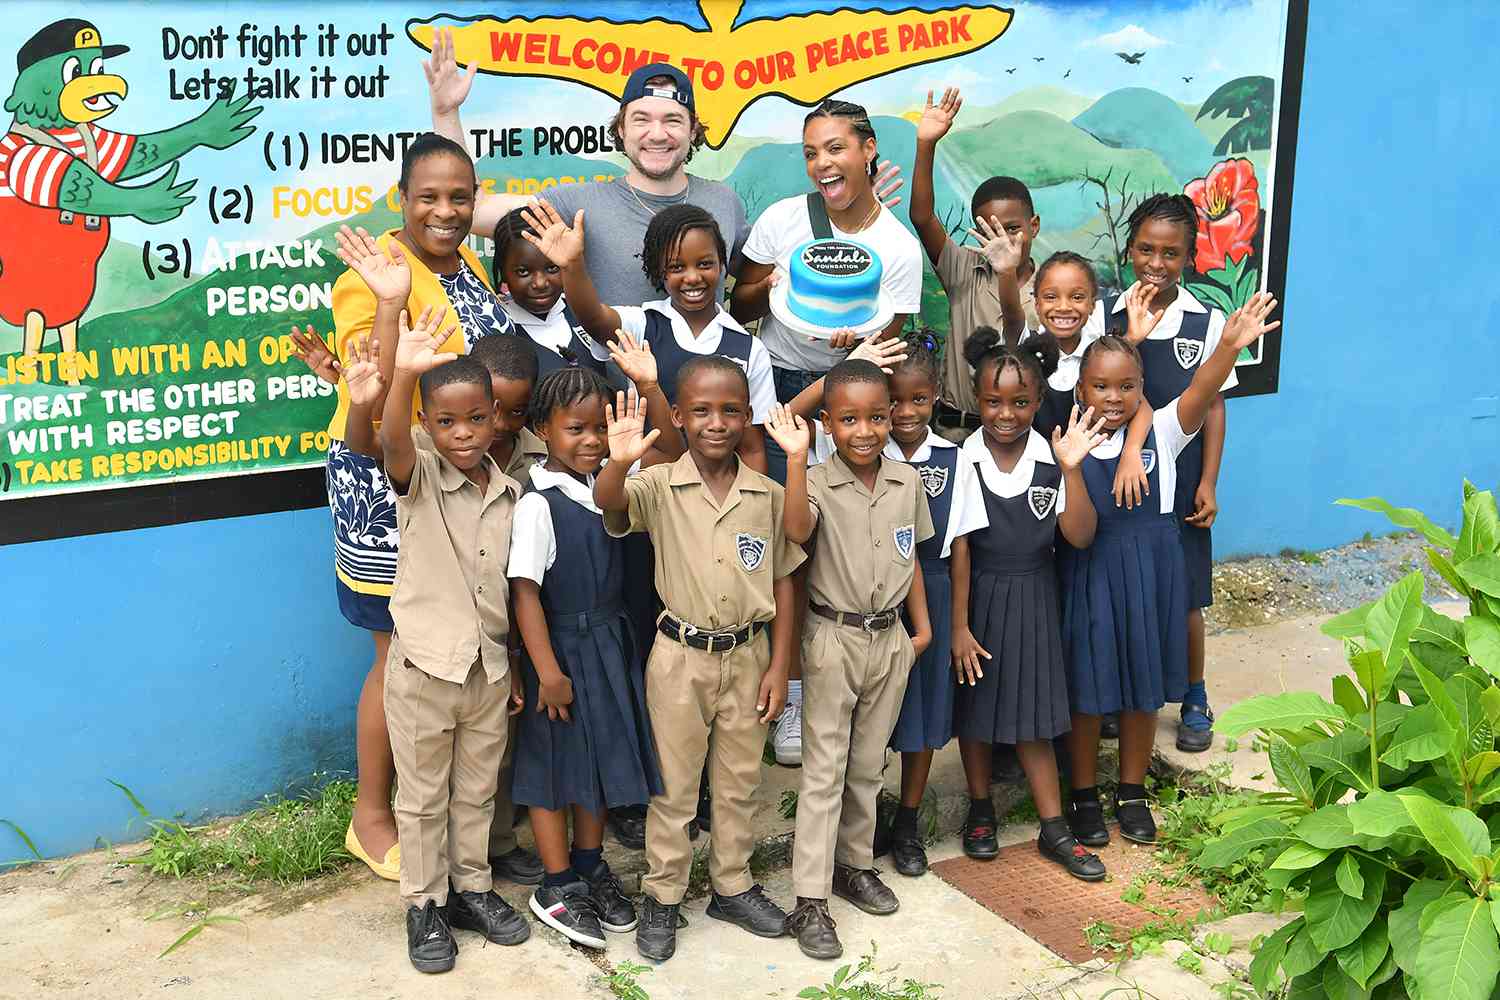 The Sandals Foundation celebrated their 15th Anniversary last week with special celebrity guests Daniel Durant and Britt Stewart who joined for a Reading Road Trip with local school children during their stay at Sandals Dunn's River in Jamaica.